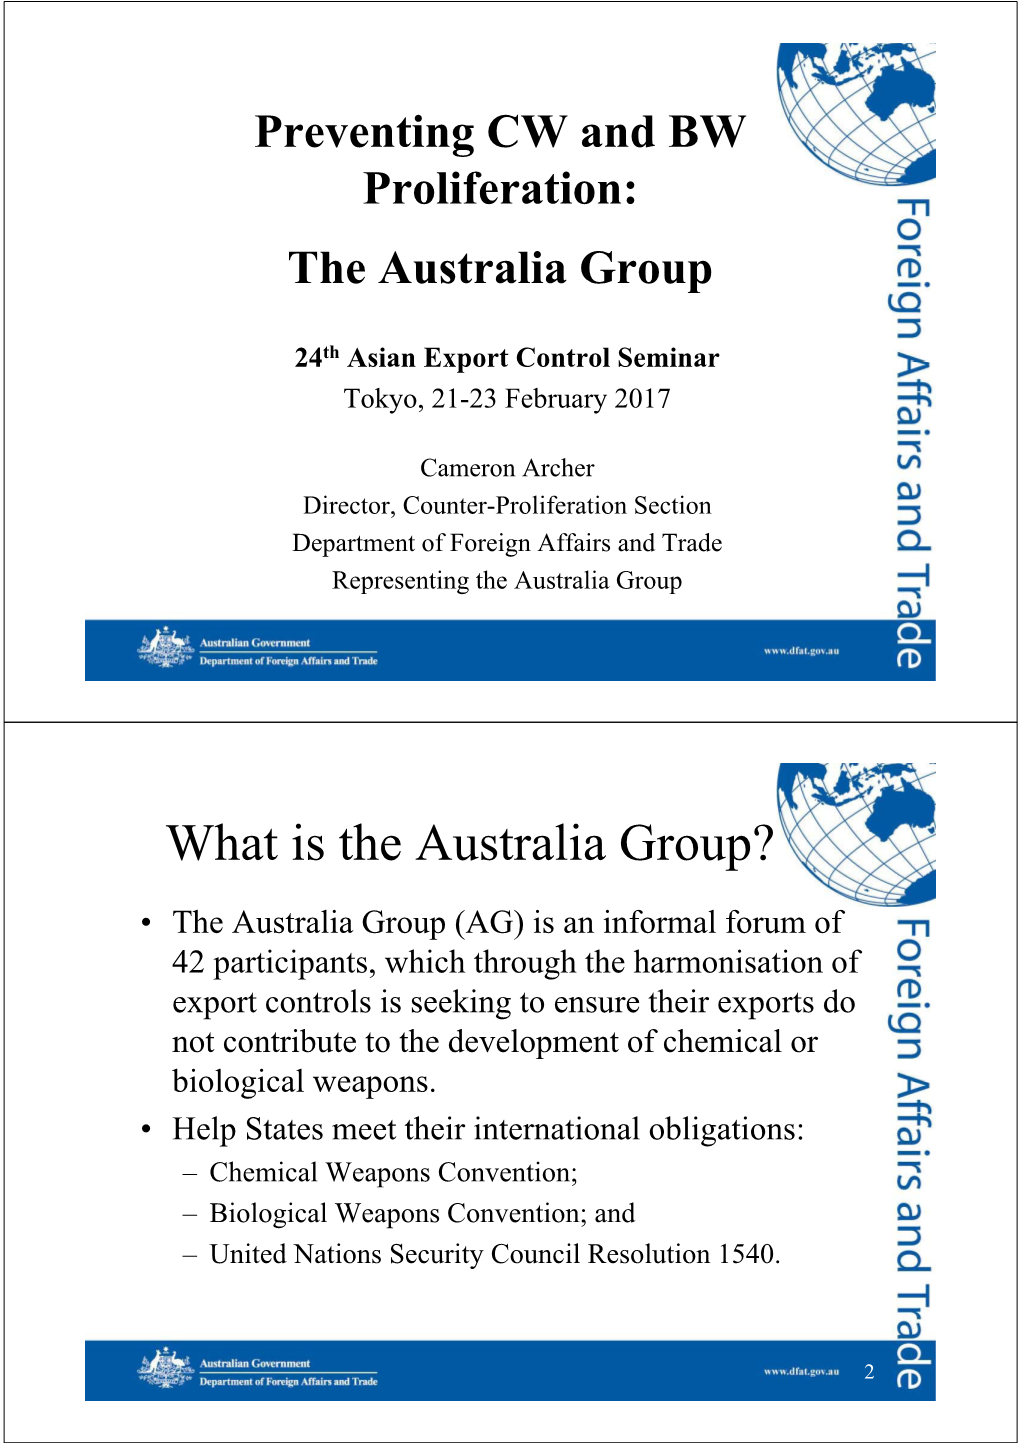 What Is the Australia Group?